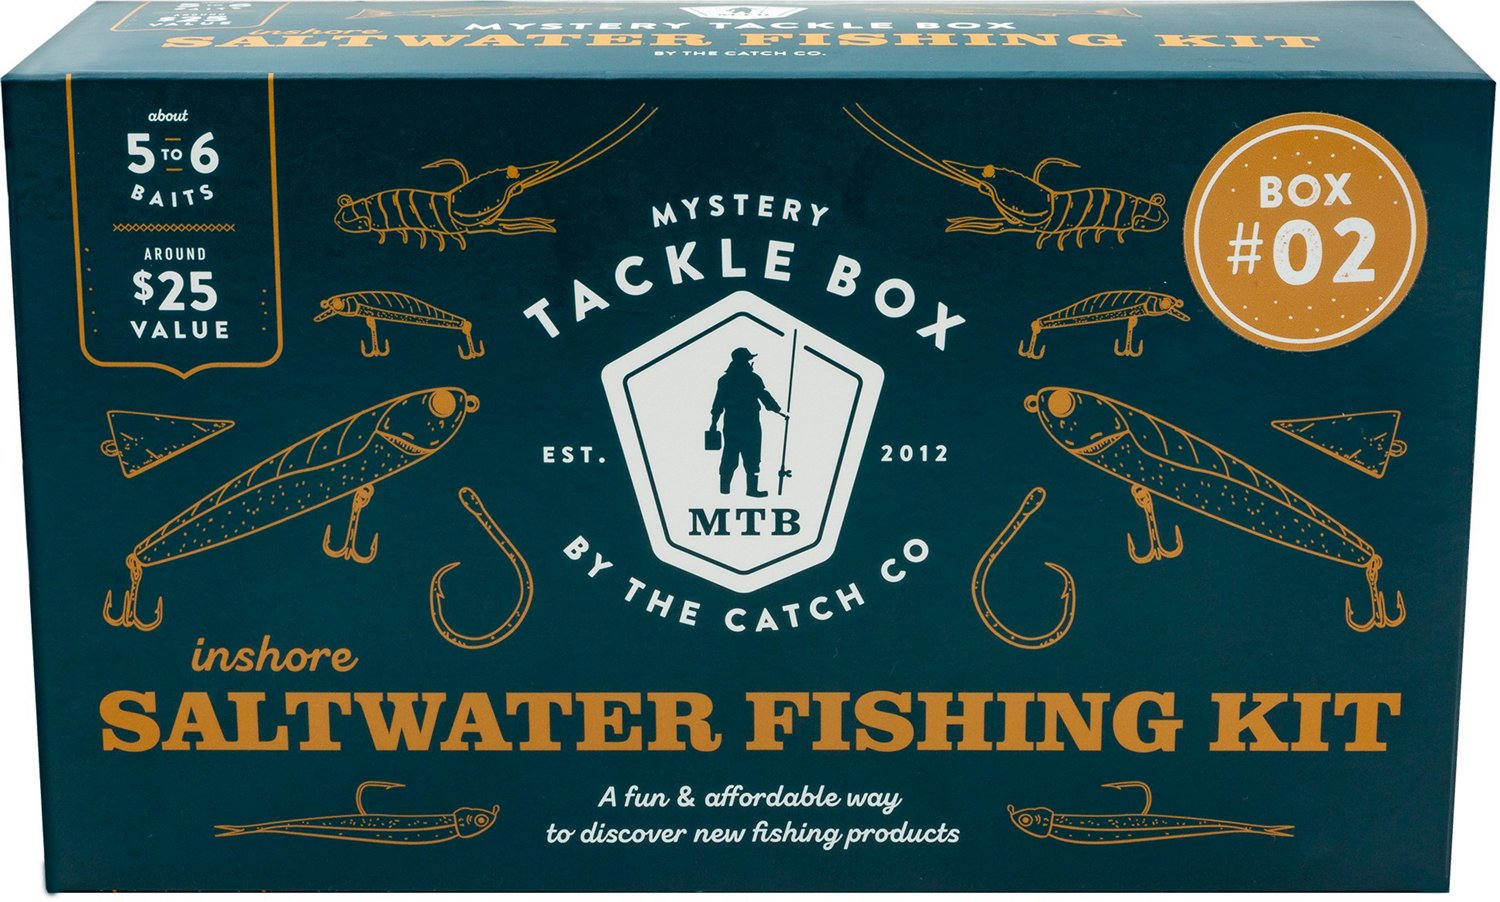 Mystery Tackle Box - Do you fish? Do you want the best deal on